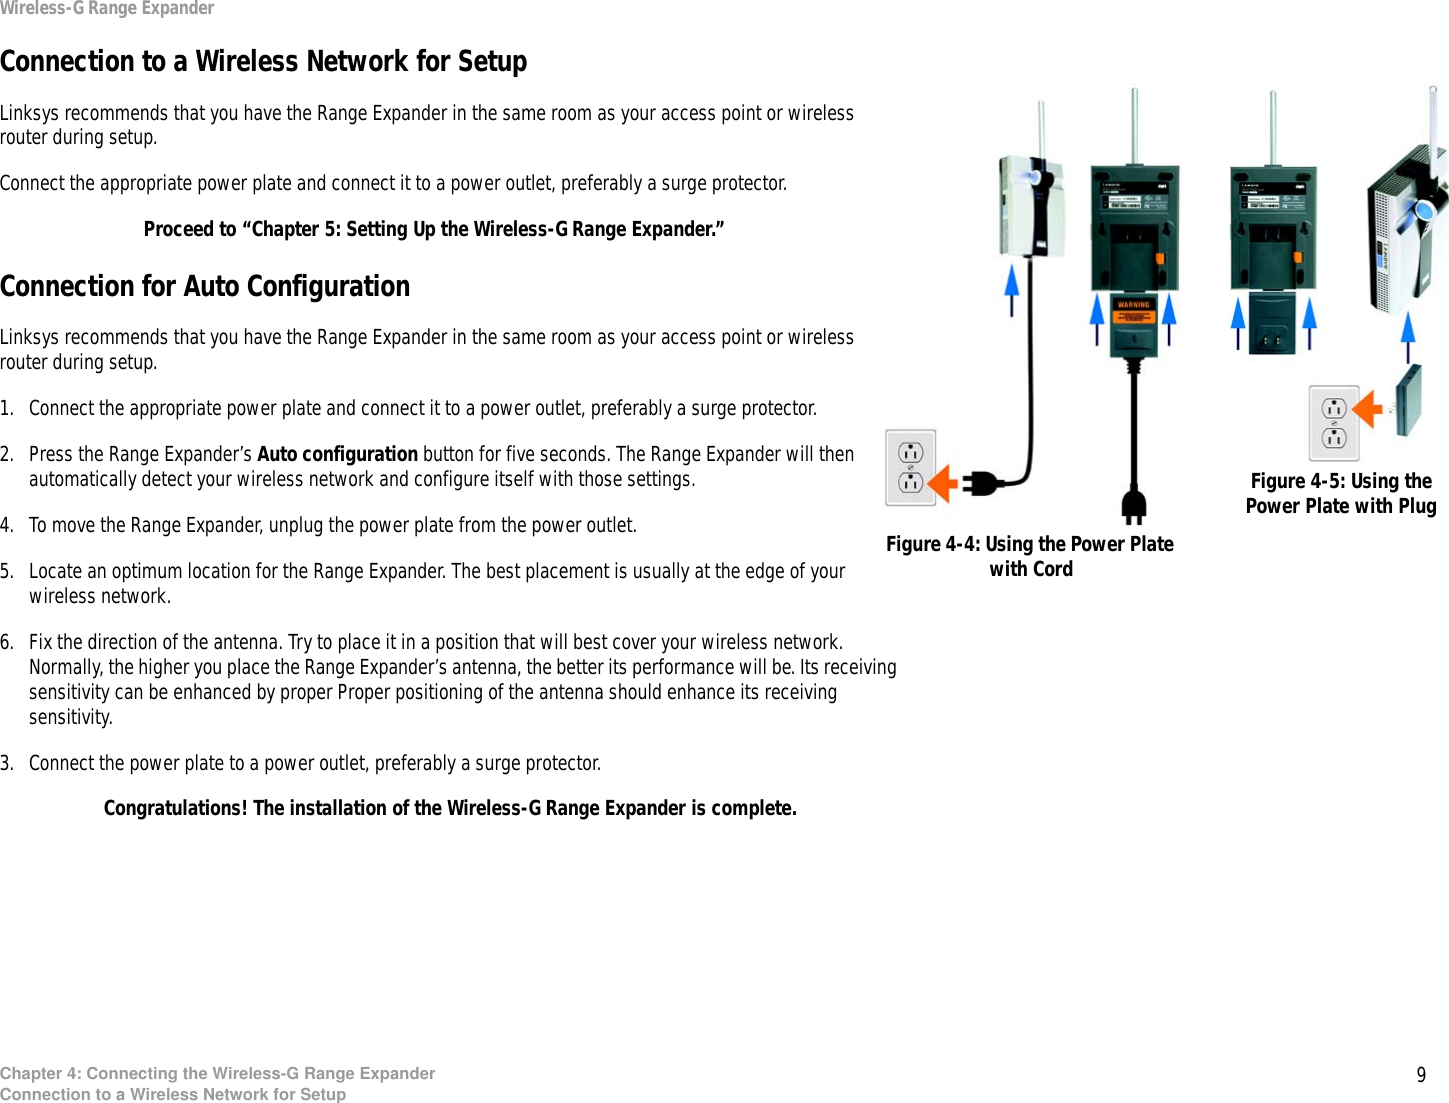 9Chapter 4: Connecting the Wireless-G Range ExpanderConnection to a Wireless Network for SetupWireless-G Range ExpanderConnection to a Wireless Network for SetupLinksys recommends that you have the Range Expander in the same room as your access point or wireless router during setup.Connect the appropriate power plate and connect it to a power outlet, preferably a surge protector.Proceed to “Chapter 5: Setting Up the Wireless-G Range Expander.”Connection for Auto ConfigurationLinksys recommends that you have the Range Expander in the same room as your access point or wireless router during setup.1. Connect the appropriate power plate and connect it to a power outlet, preferably a surge protector.2. Press the Range Expander’s Auto configuration button for five seconds. The Range Expander will then automatically detect your wireless network and configure itself with those settings.4. To move the Range Expander, unplug the power plate from the power outlet.5. Locate an optimum location for the Range Expander. The best placement is usually at the edge of your wireless network.6. Fix the direction of the antenna. Try to place it in a position that will best cover your wireless network. Normally, the higher you place the Range Expander’s antenna, the better its performance will be. Its receiving sensitivity can be enhanced by proper Proper positioning of the antenna should enhance its receiving sensitivity.3. Connect the power plate to a power outlet, preferably a surge protector.Congratulations! The installation of the Wireless-G Range Expander is complete.Figure 4-4: Using the Power Plate with CordFigure 4-5: Using the Power Plate with Plug